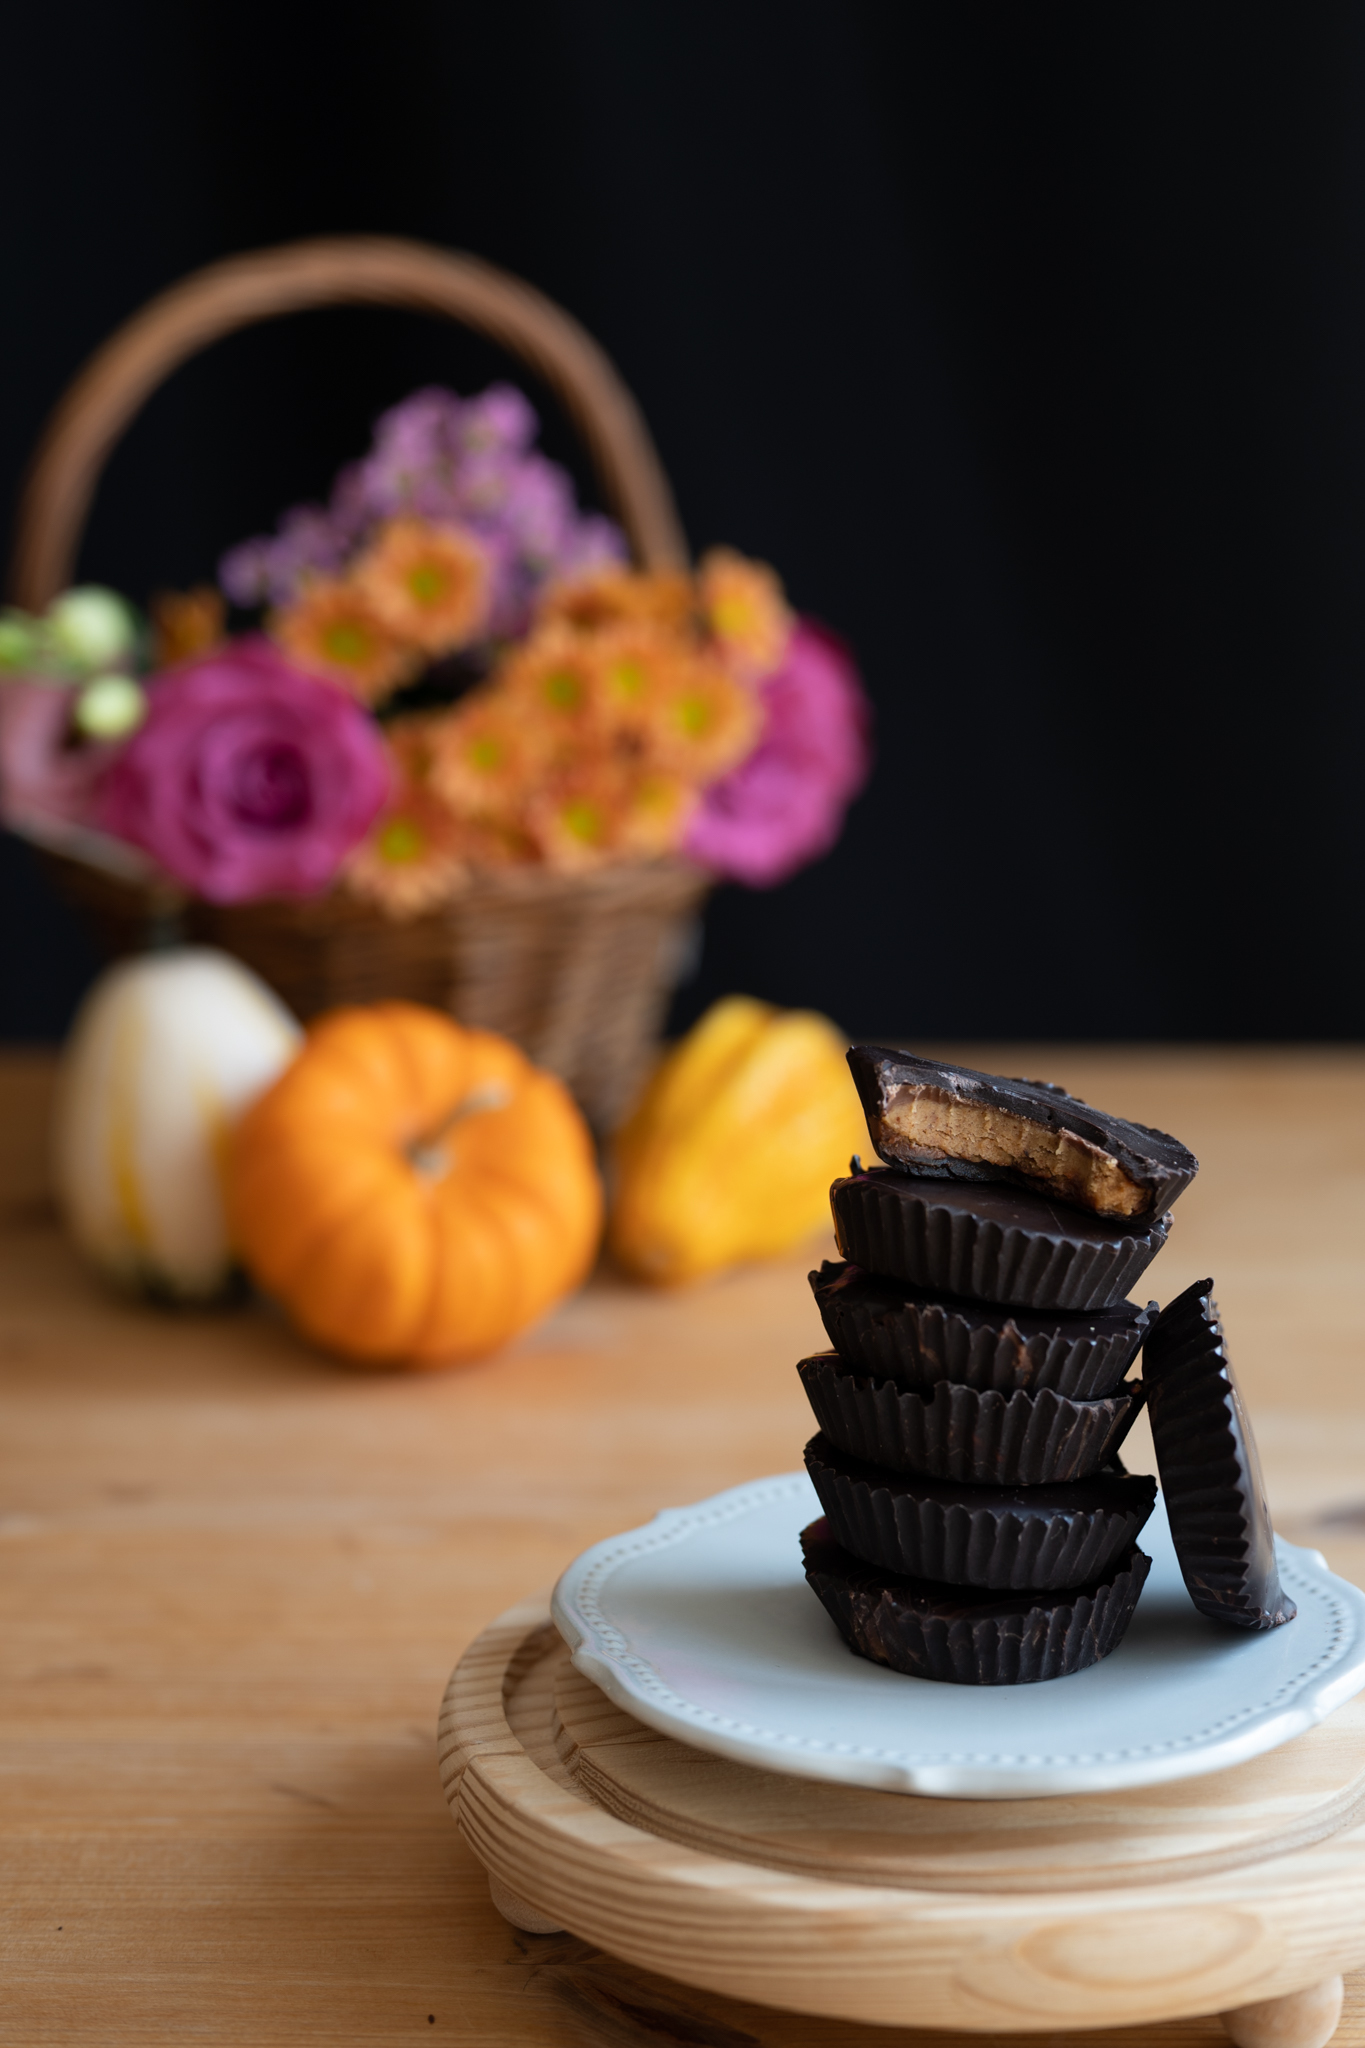 a stack of herbal peanut butter cups on a white plate with a basket of flowers and pumpkins in the background